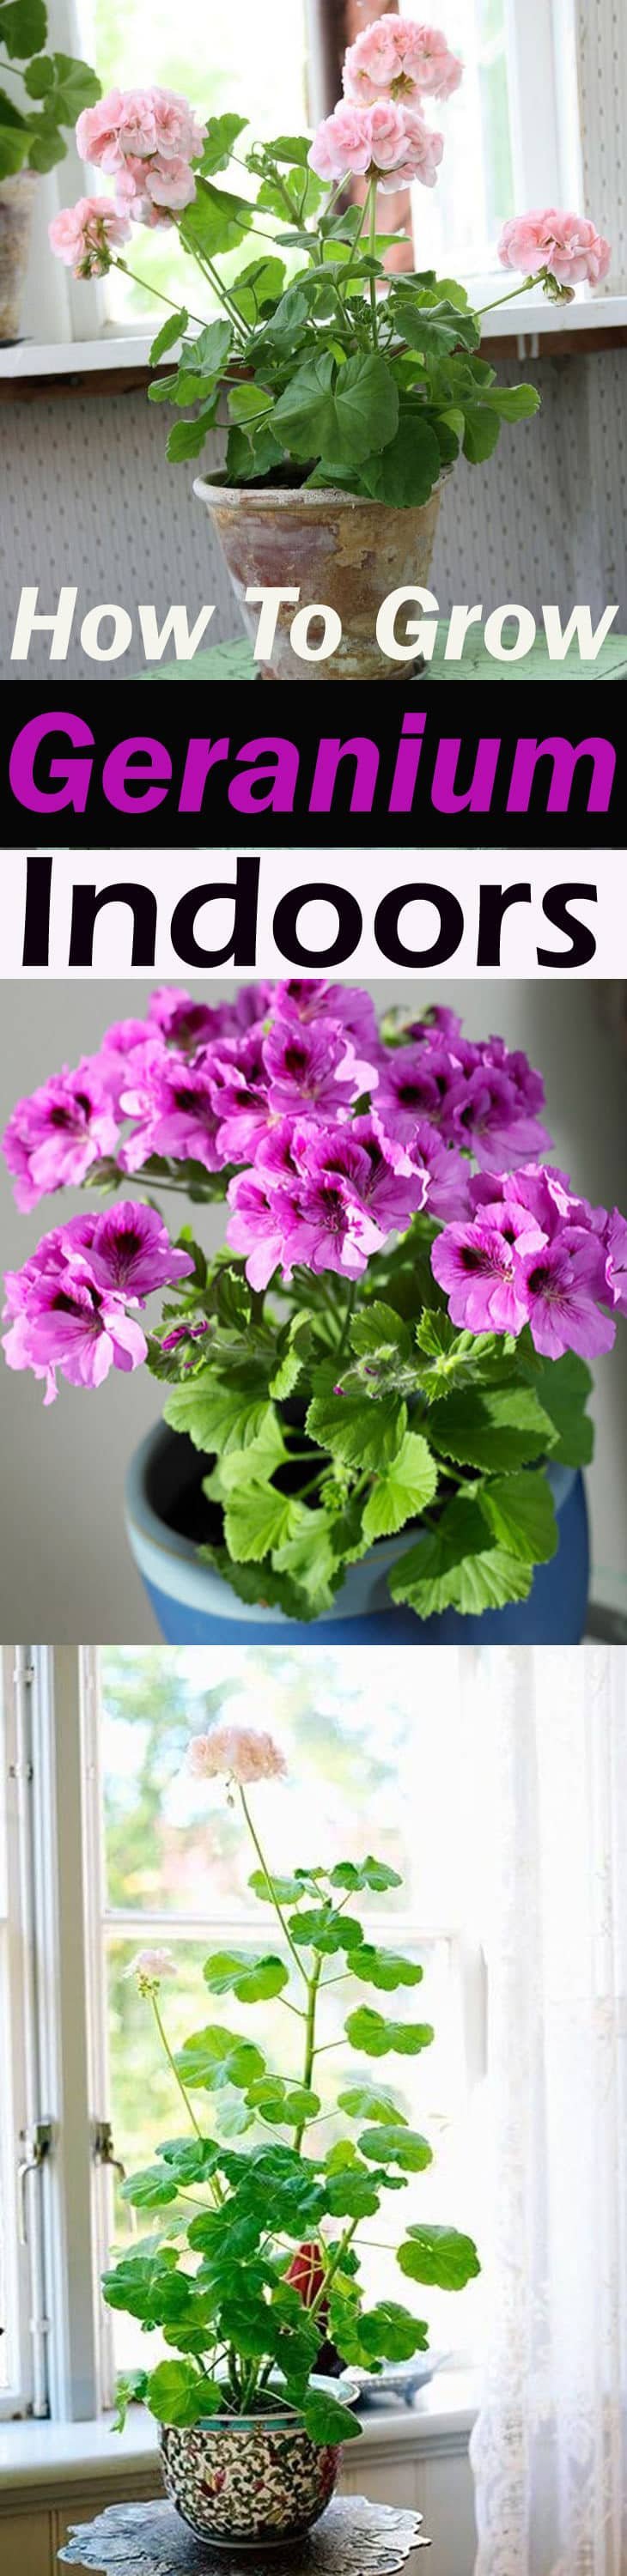 Learn how to grow geranium indoors, growing geranium as a houseplant will allow you to have them year round. Check out!